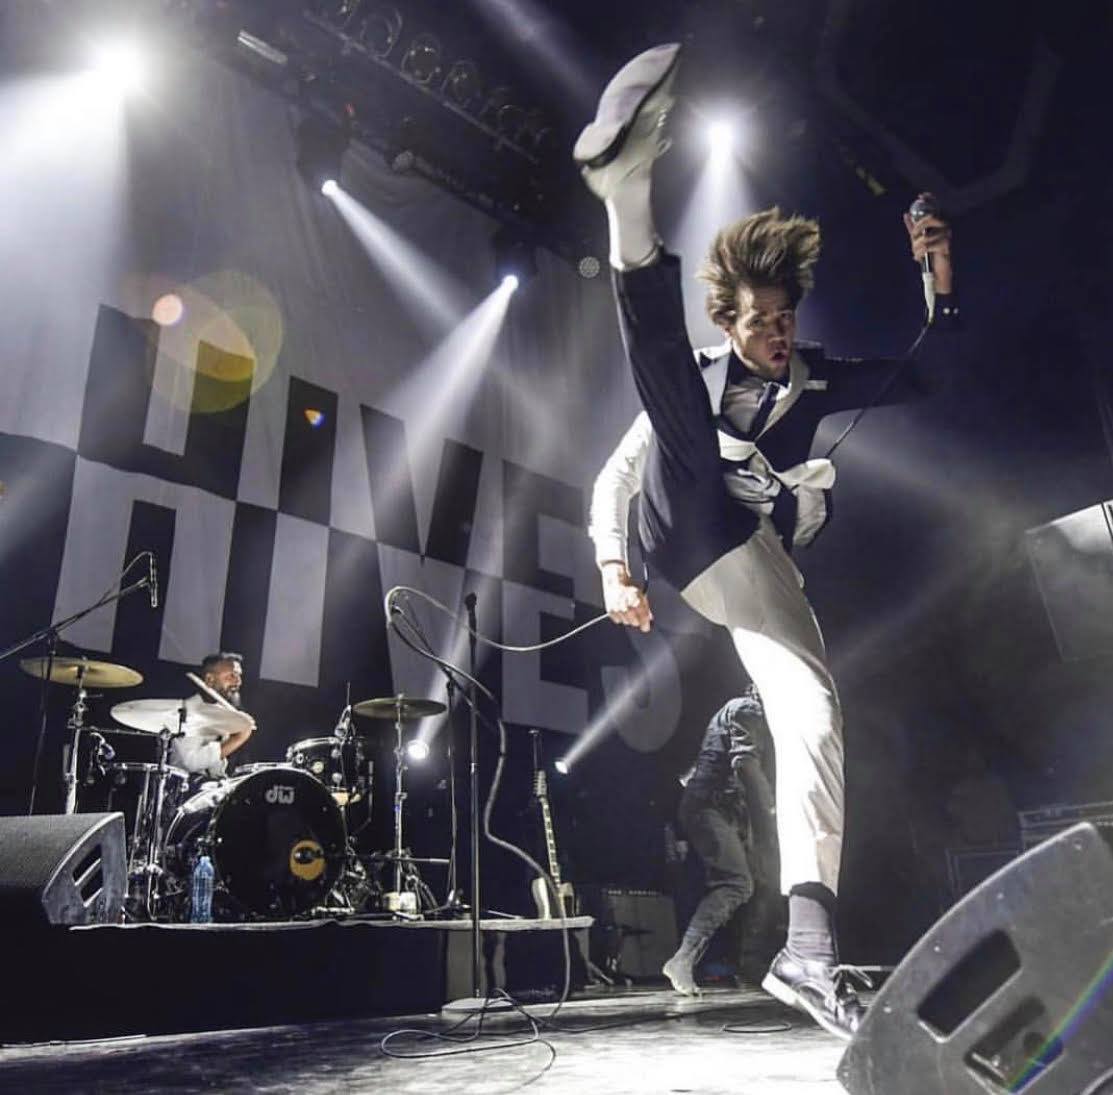 The Hives Release New Single "I'm Alive."